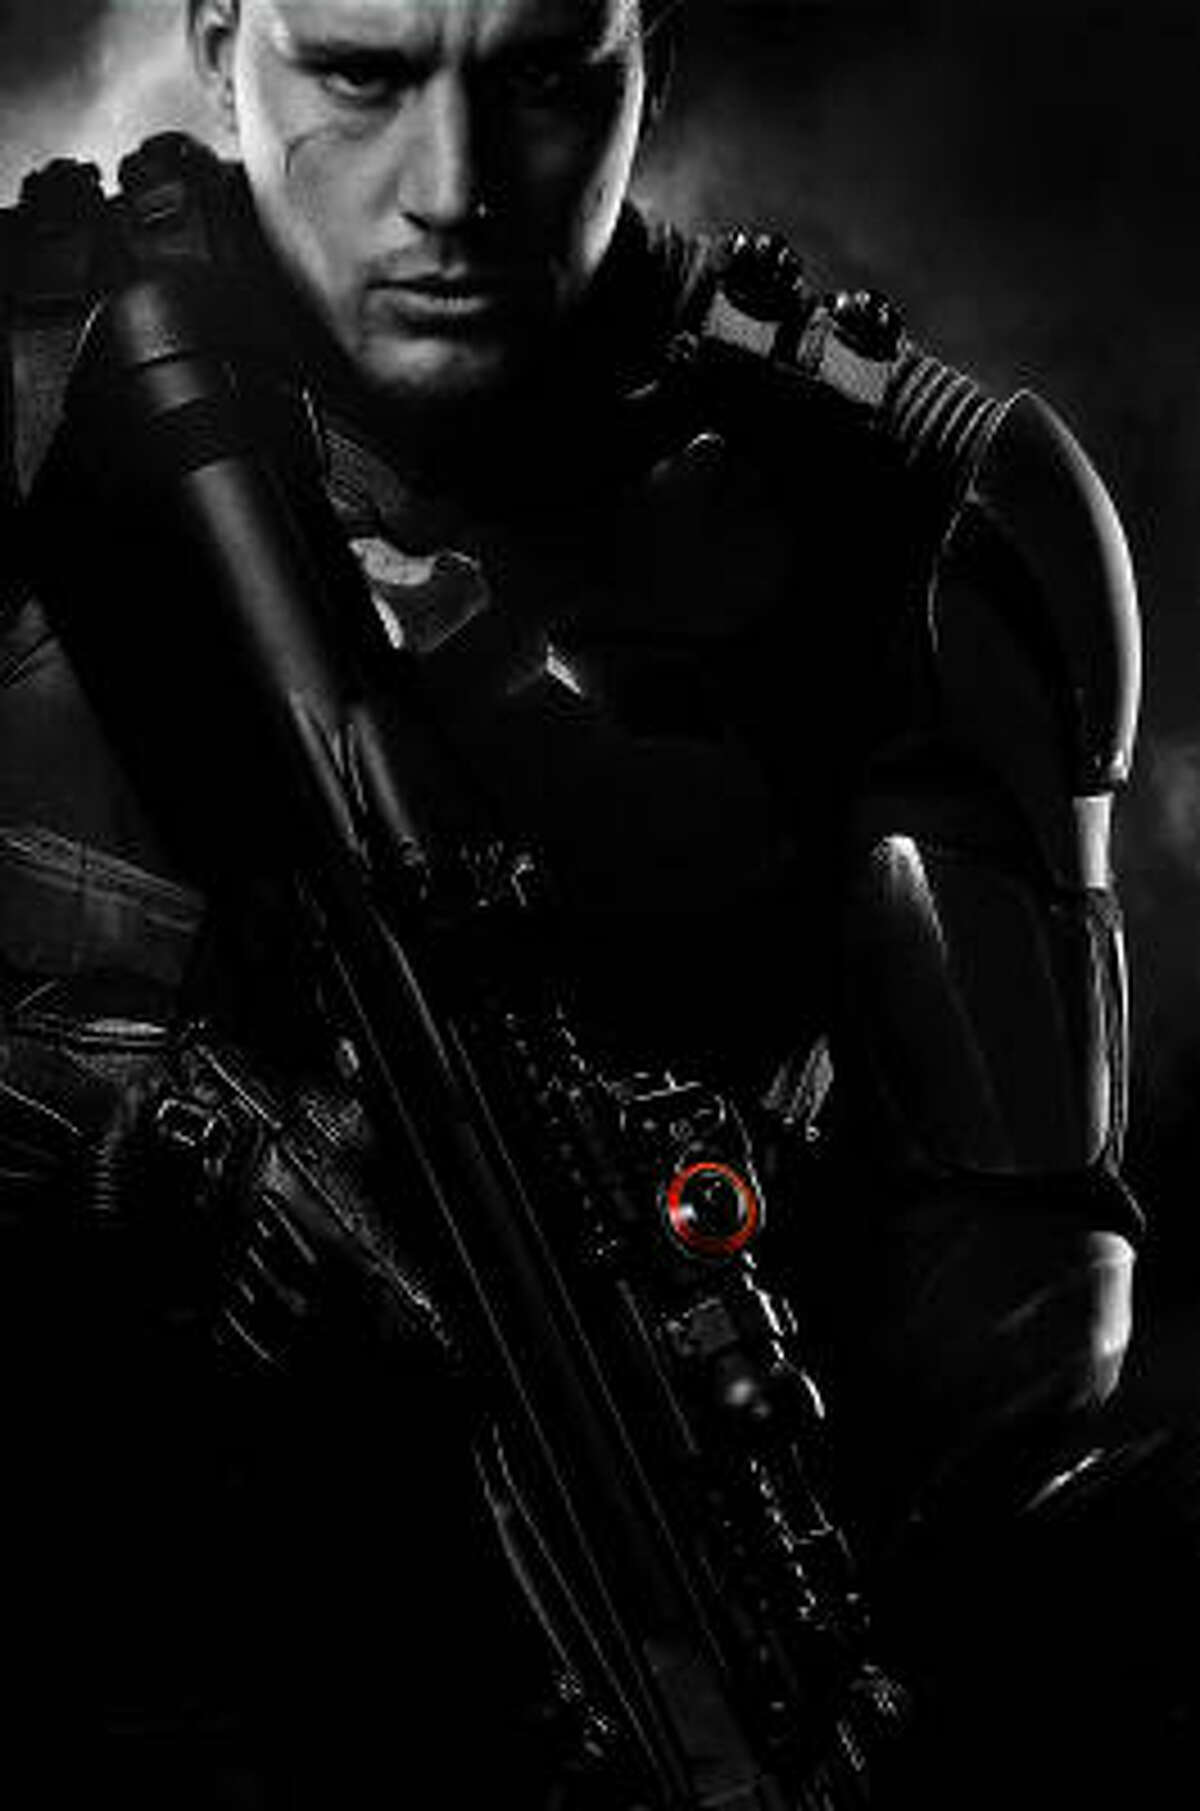 1. G.I. Joe: The Rise of Cobra rakes in $56.2 million this weekend. To read more about box office trends, click here.